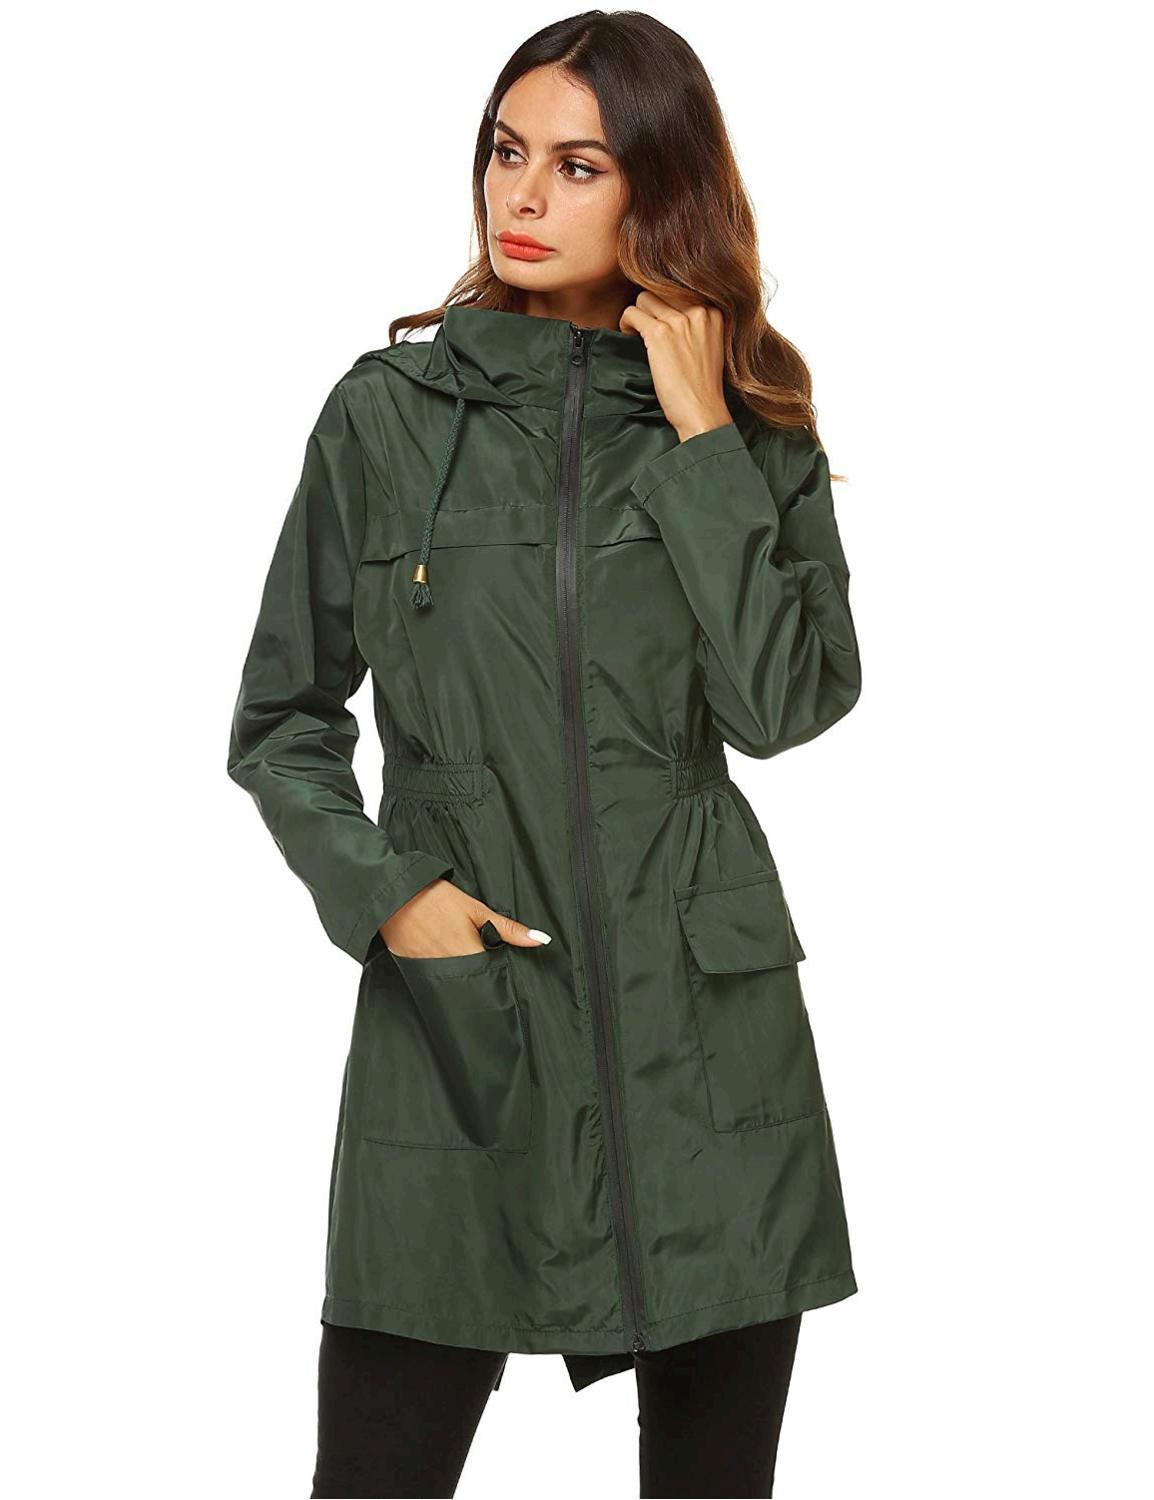 LOMON Women Raincoat Packable and Lightweight for Travel, Amy Green ...